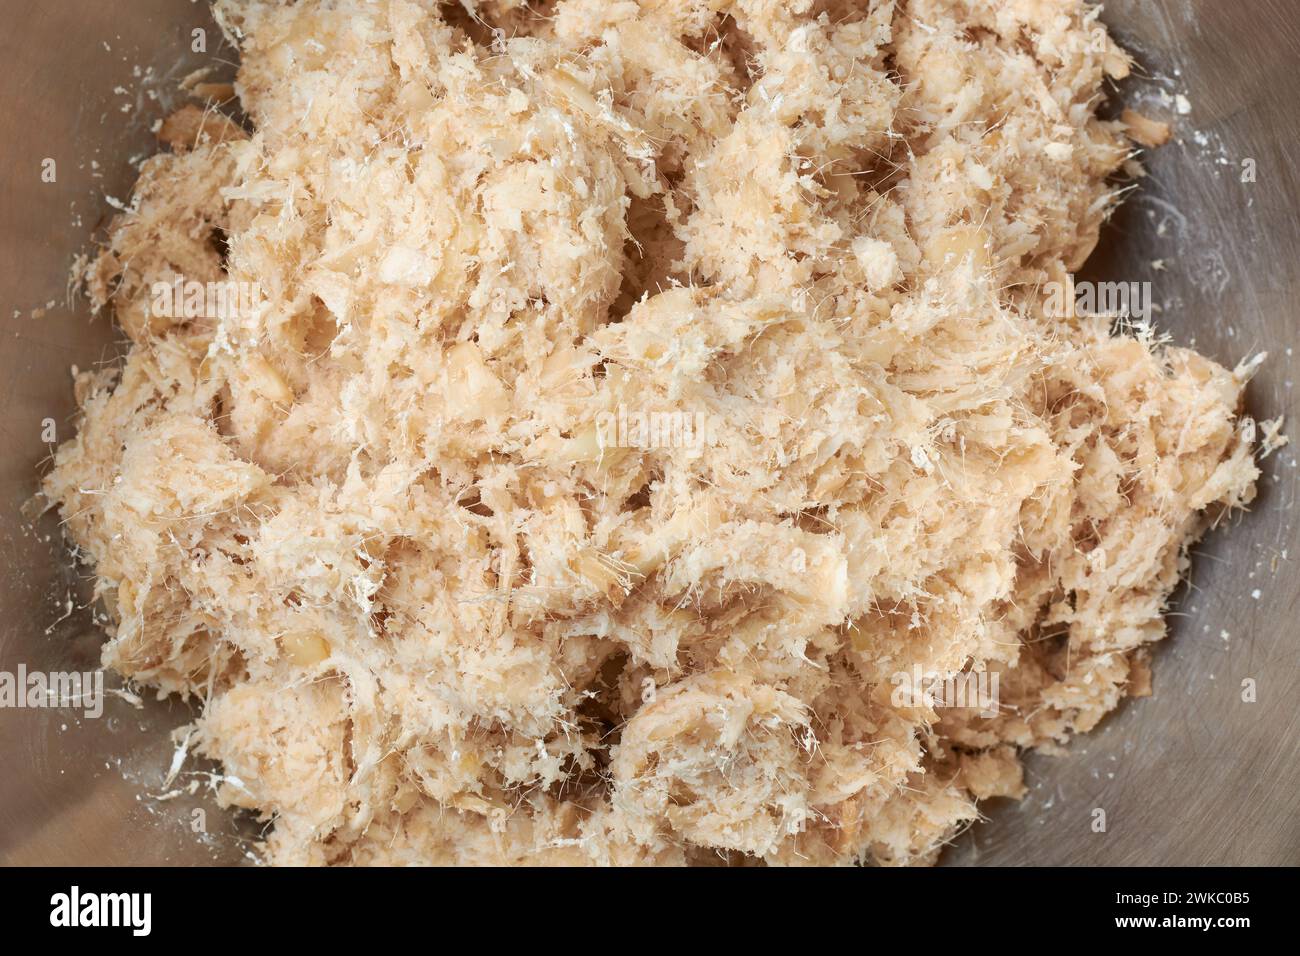 pulp of dried organic arrowroot rhizomes pieces to process into powder, maranta arundinacea, washed, peeled and finely ground into pulp Stock Photo